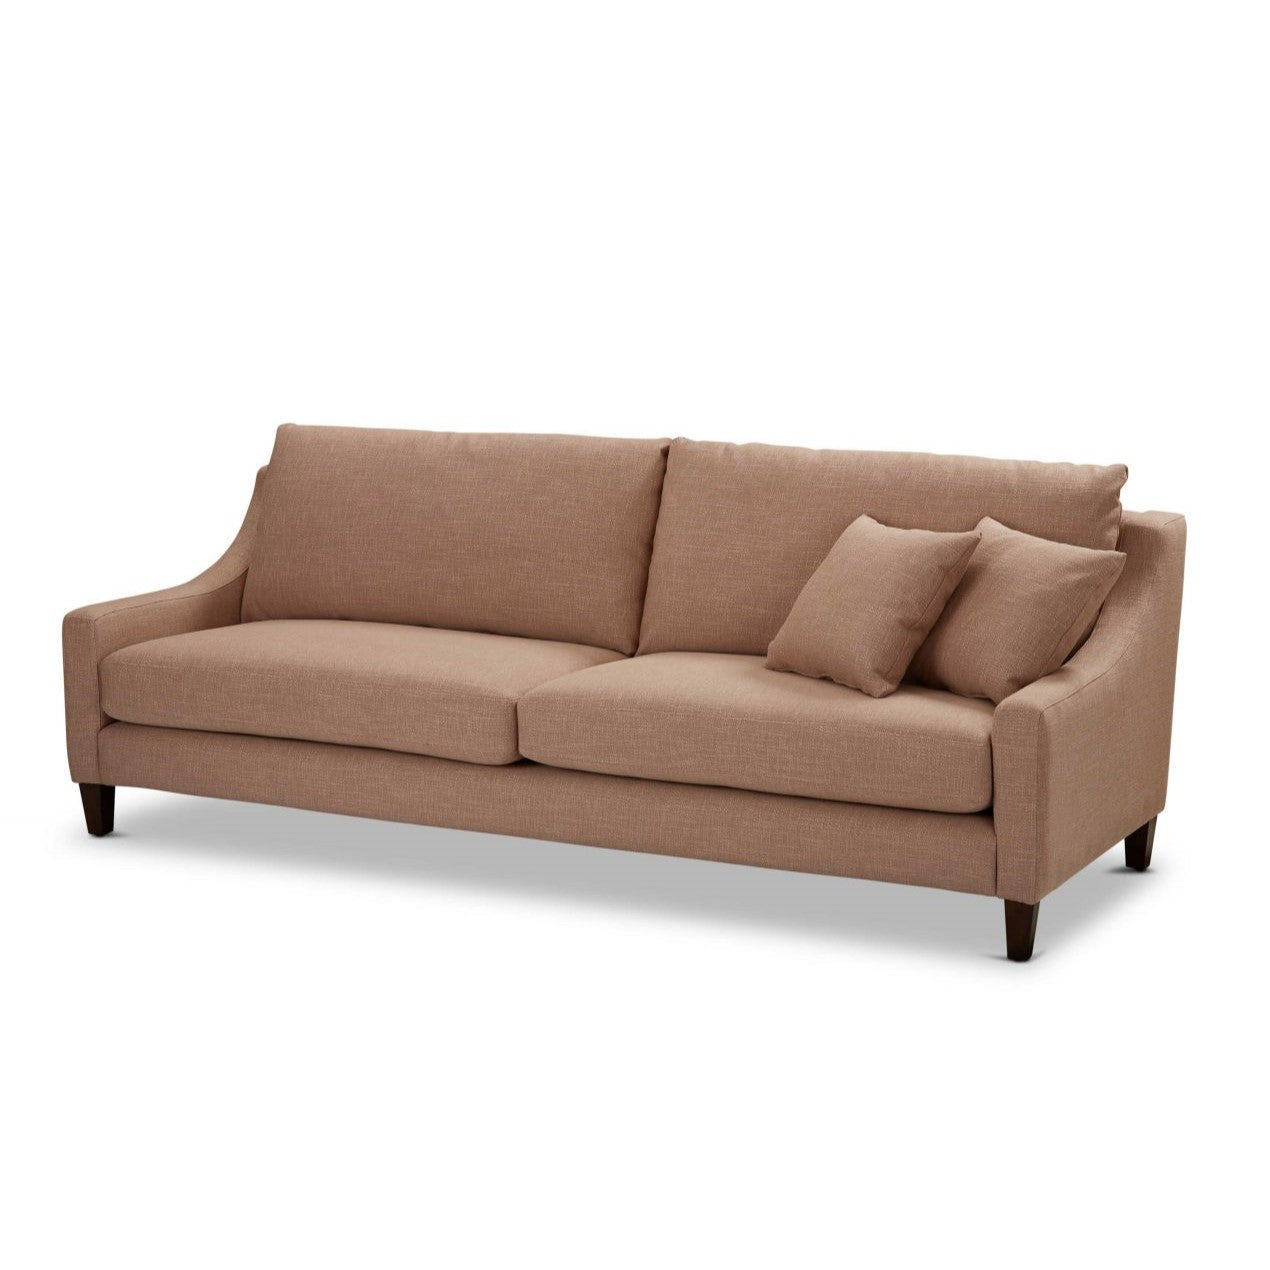 Tasman Sofa by Molmic available from Make Your House A Home, Furniture Store located in Bendigo, Victoria. Australian Made in Melbourne.